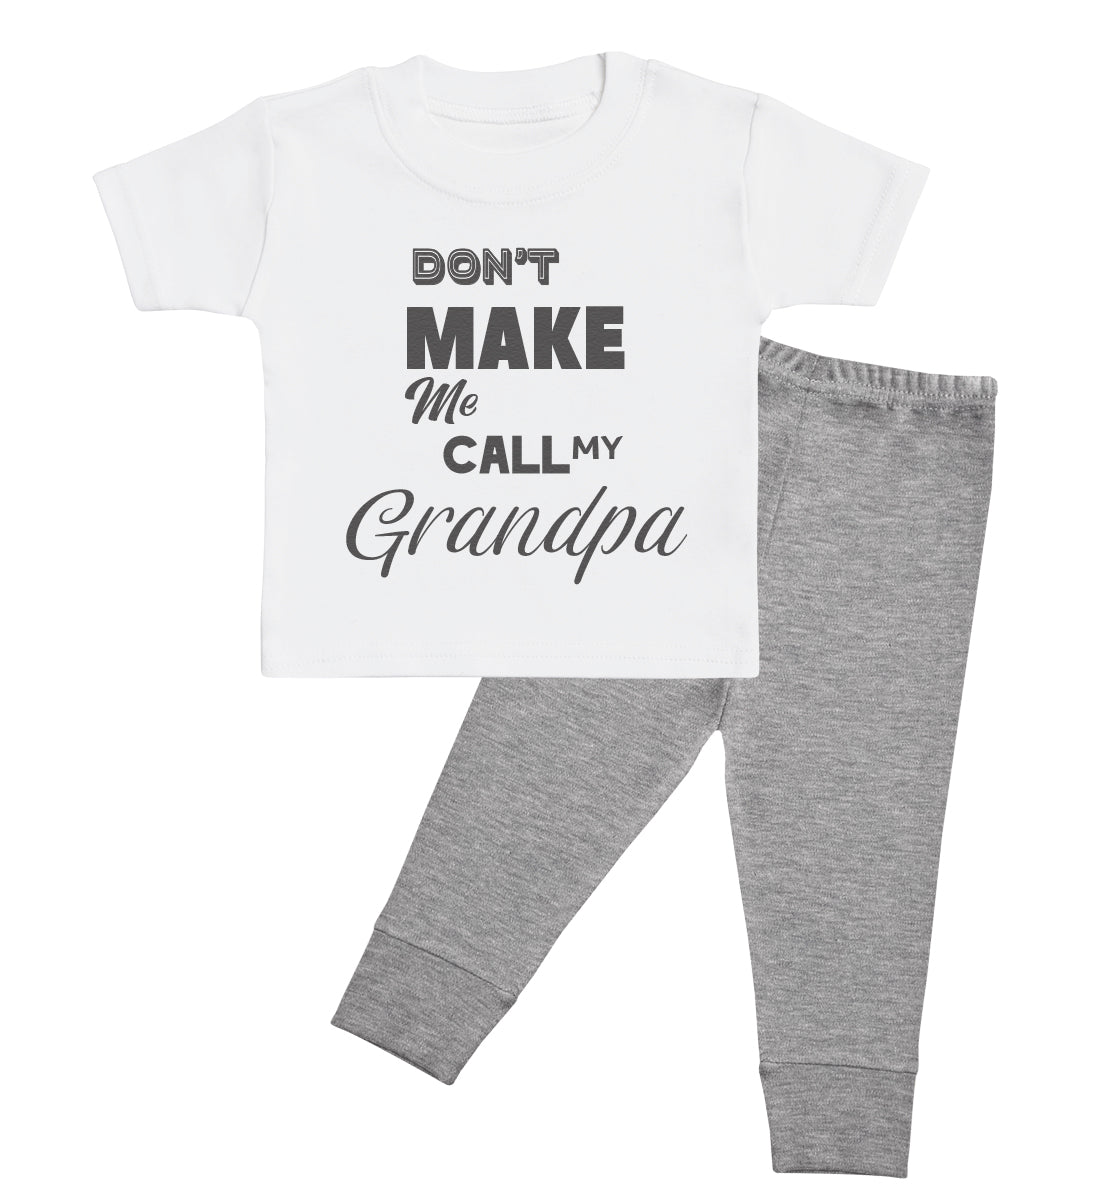 Pick A Family Name - Dont Make Me Call Mummy, Auntie, Grandad and more - Baby Outfit Set